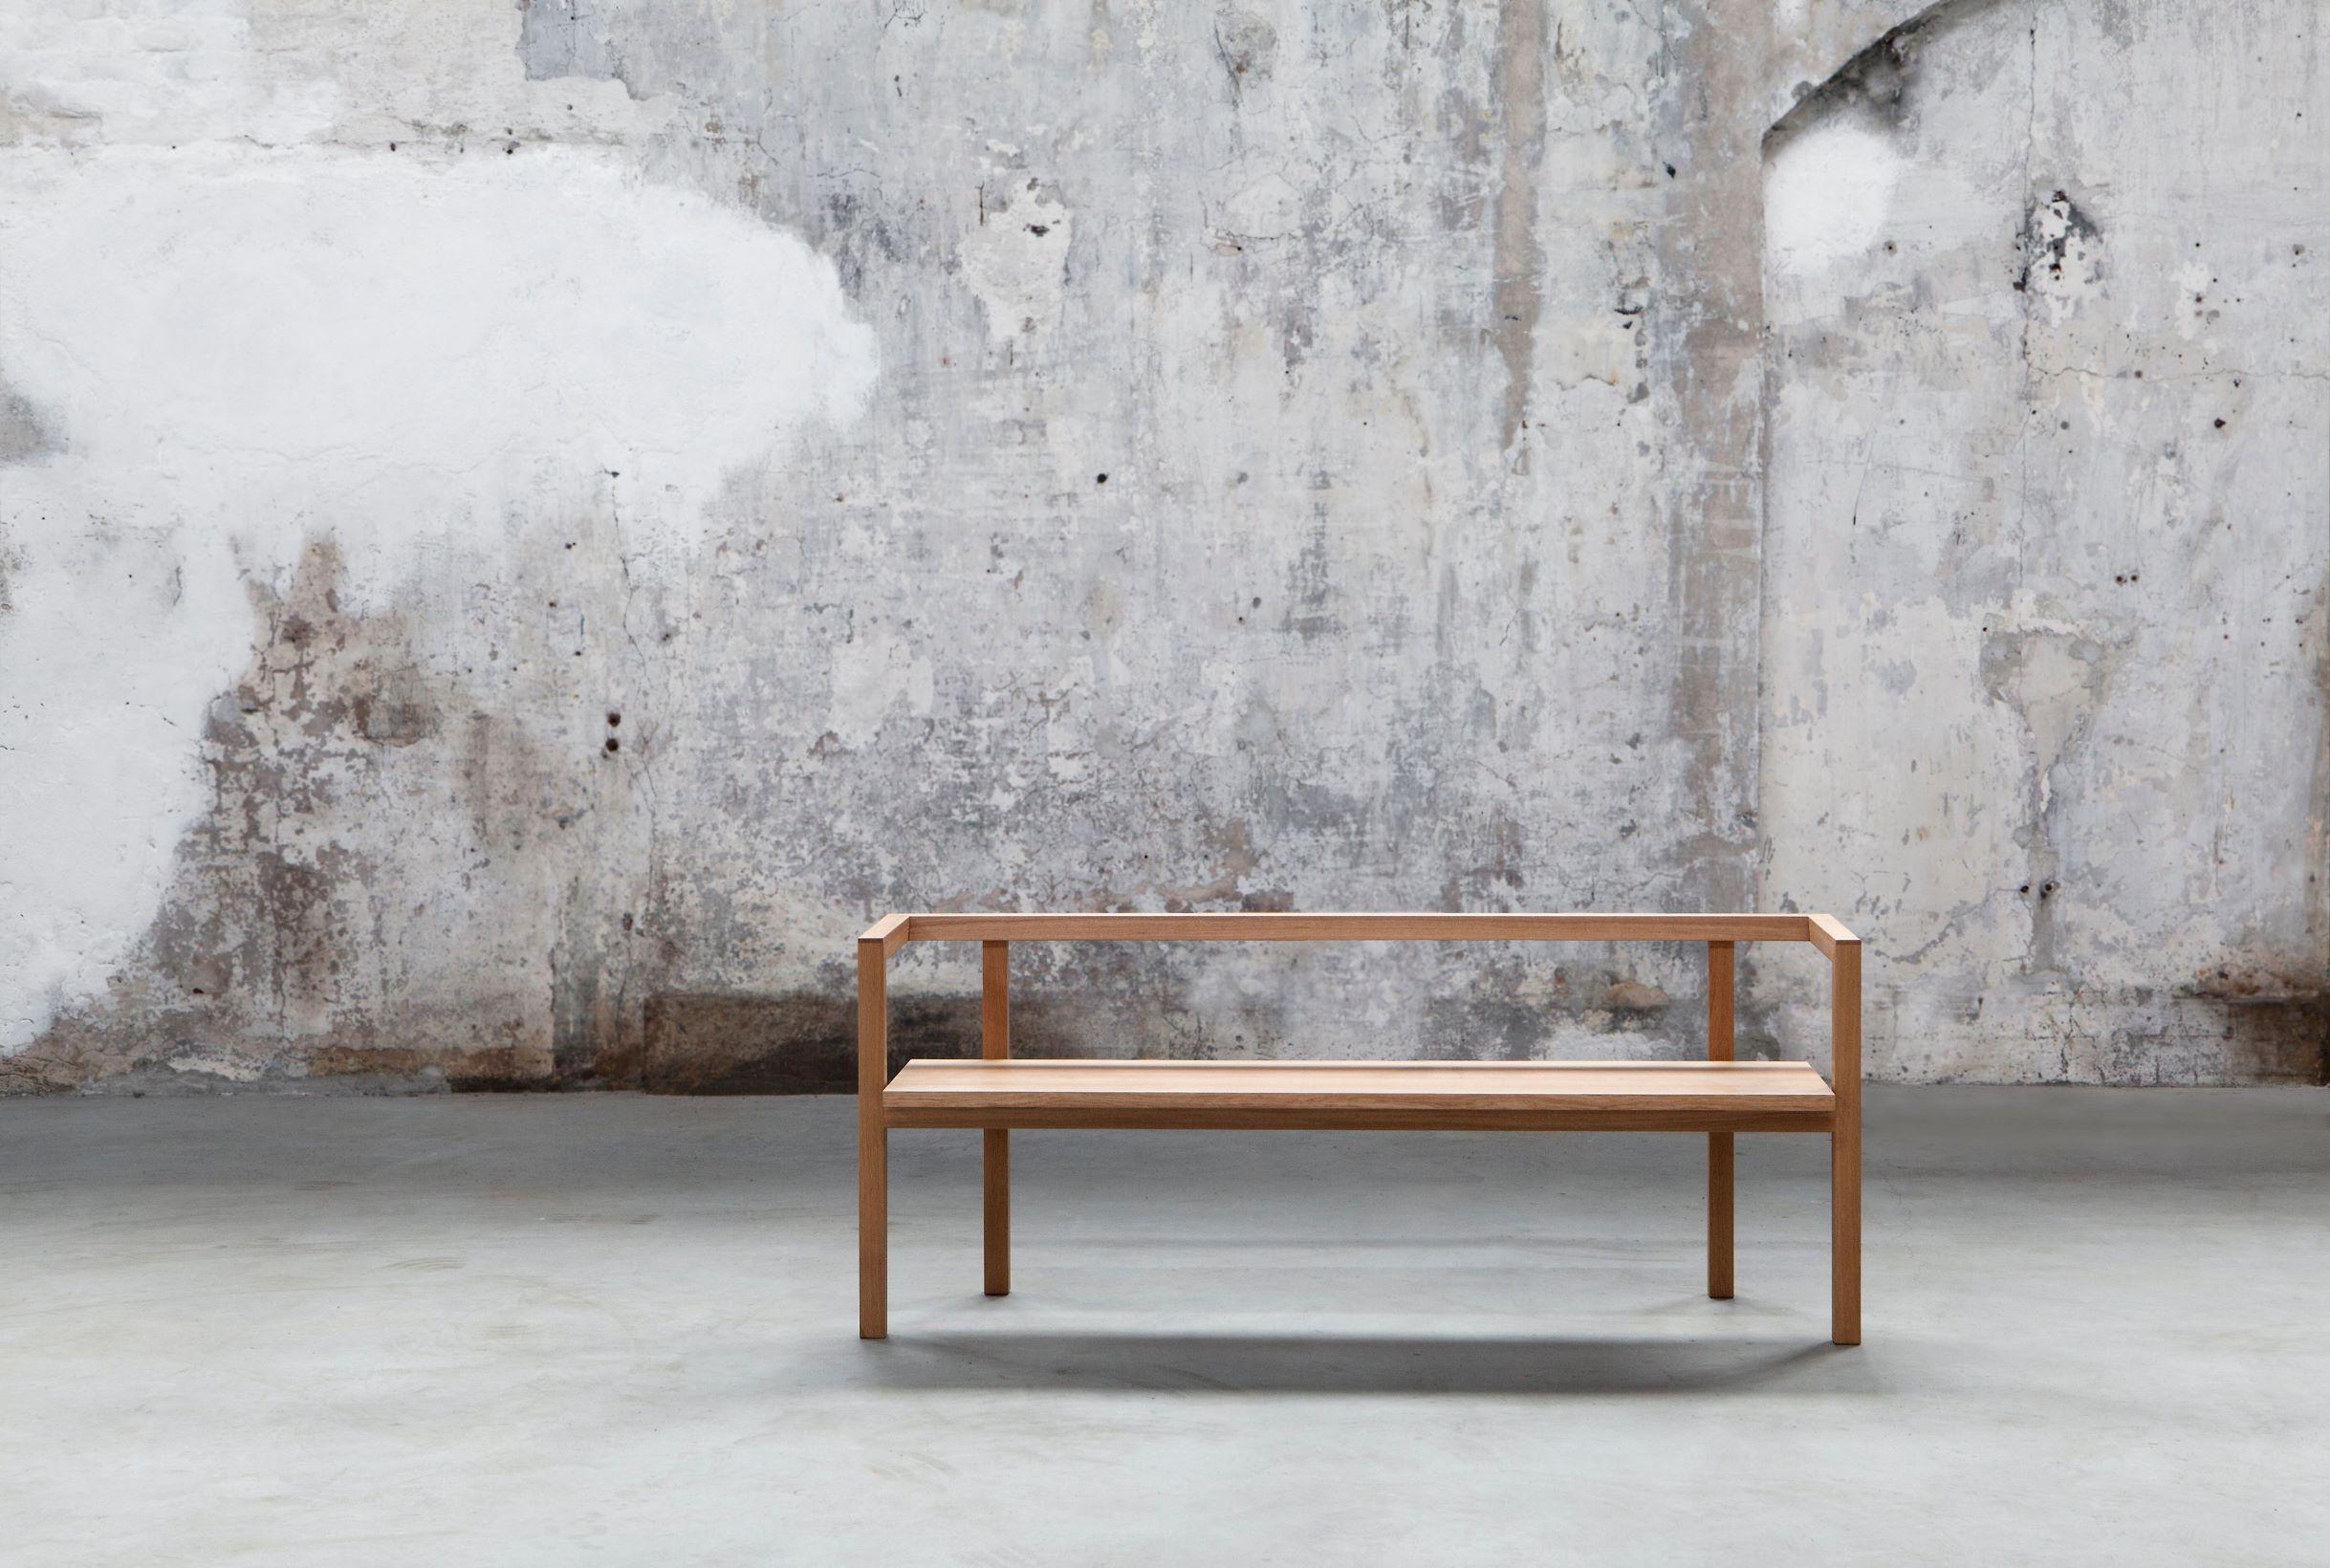 The streamlined solid wooden bench is meant for indoors. Its elegant lines fit in homes as well as public areas. When needed, the seat can be upholstered.
Materials:
Birch, ash or oak
Upholstery: coconut fibre, wool and cotton

Surface
Natural